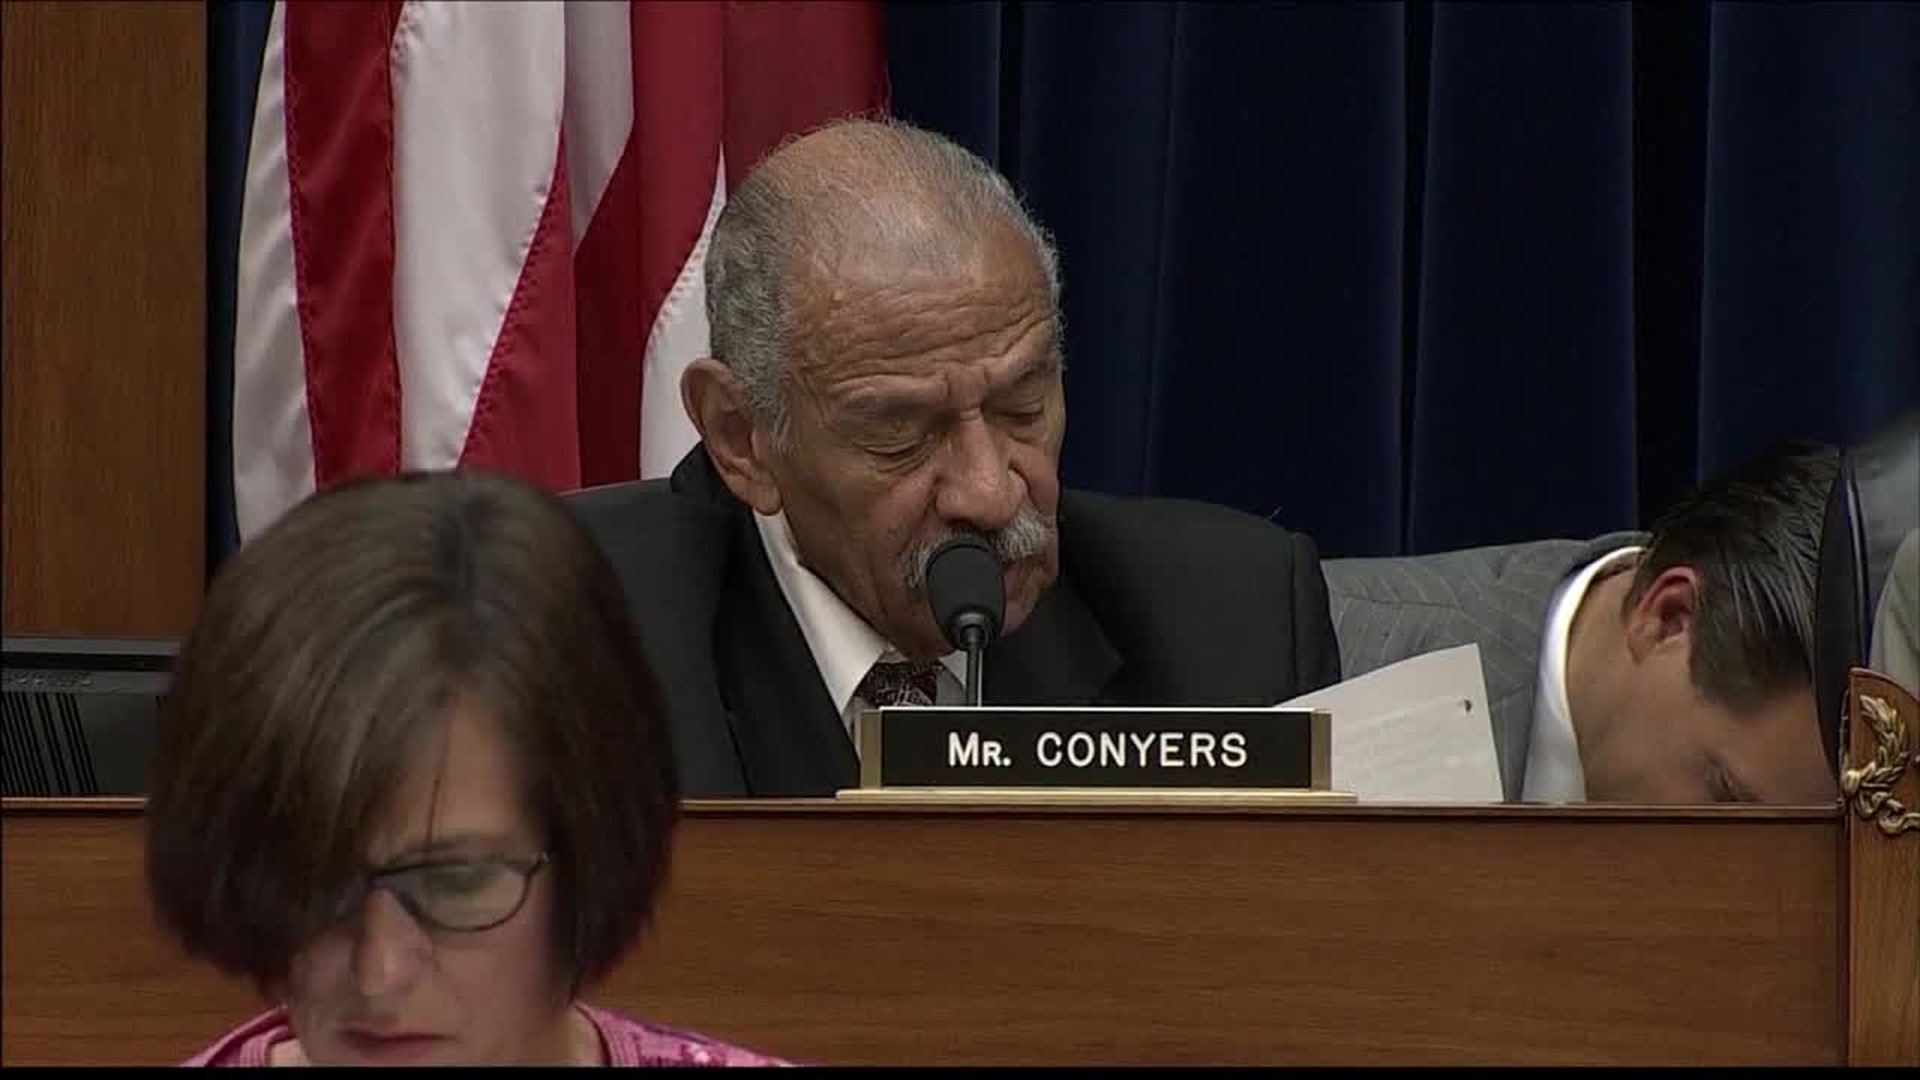 Former U.S. Rep. John Conyers, one of the longest-serving members of Congress whose resolutely liberal stance on civil rights made him a political institution in Washington and back home in Detroit despite several scandals, has died. He was 90.